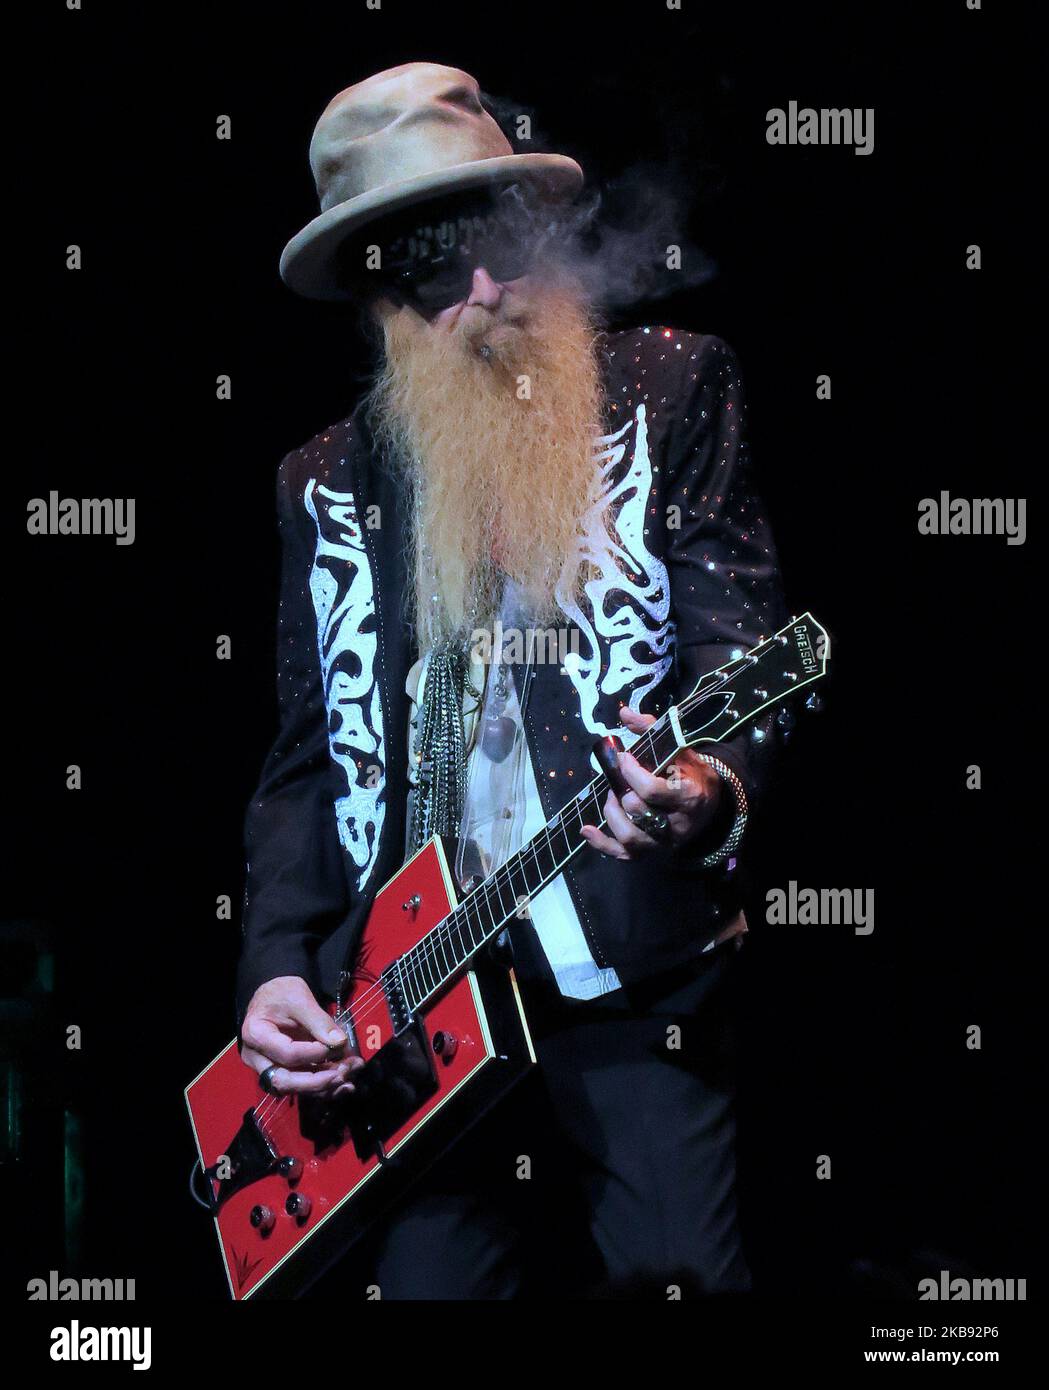 Billy gibbons hi-res photography and images - Alamy